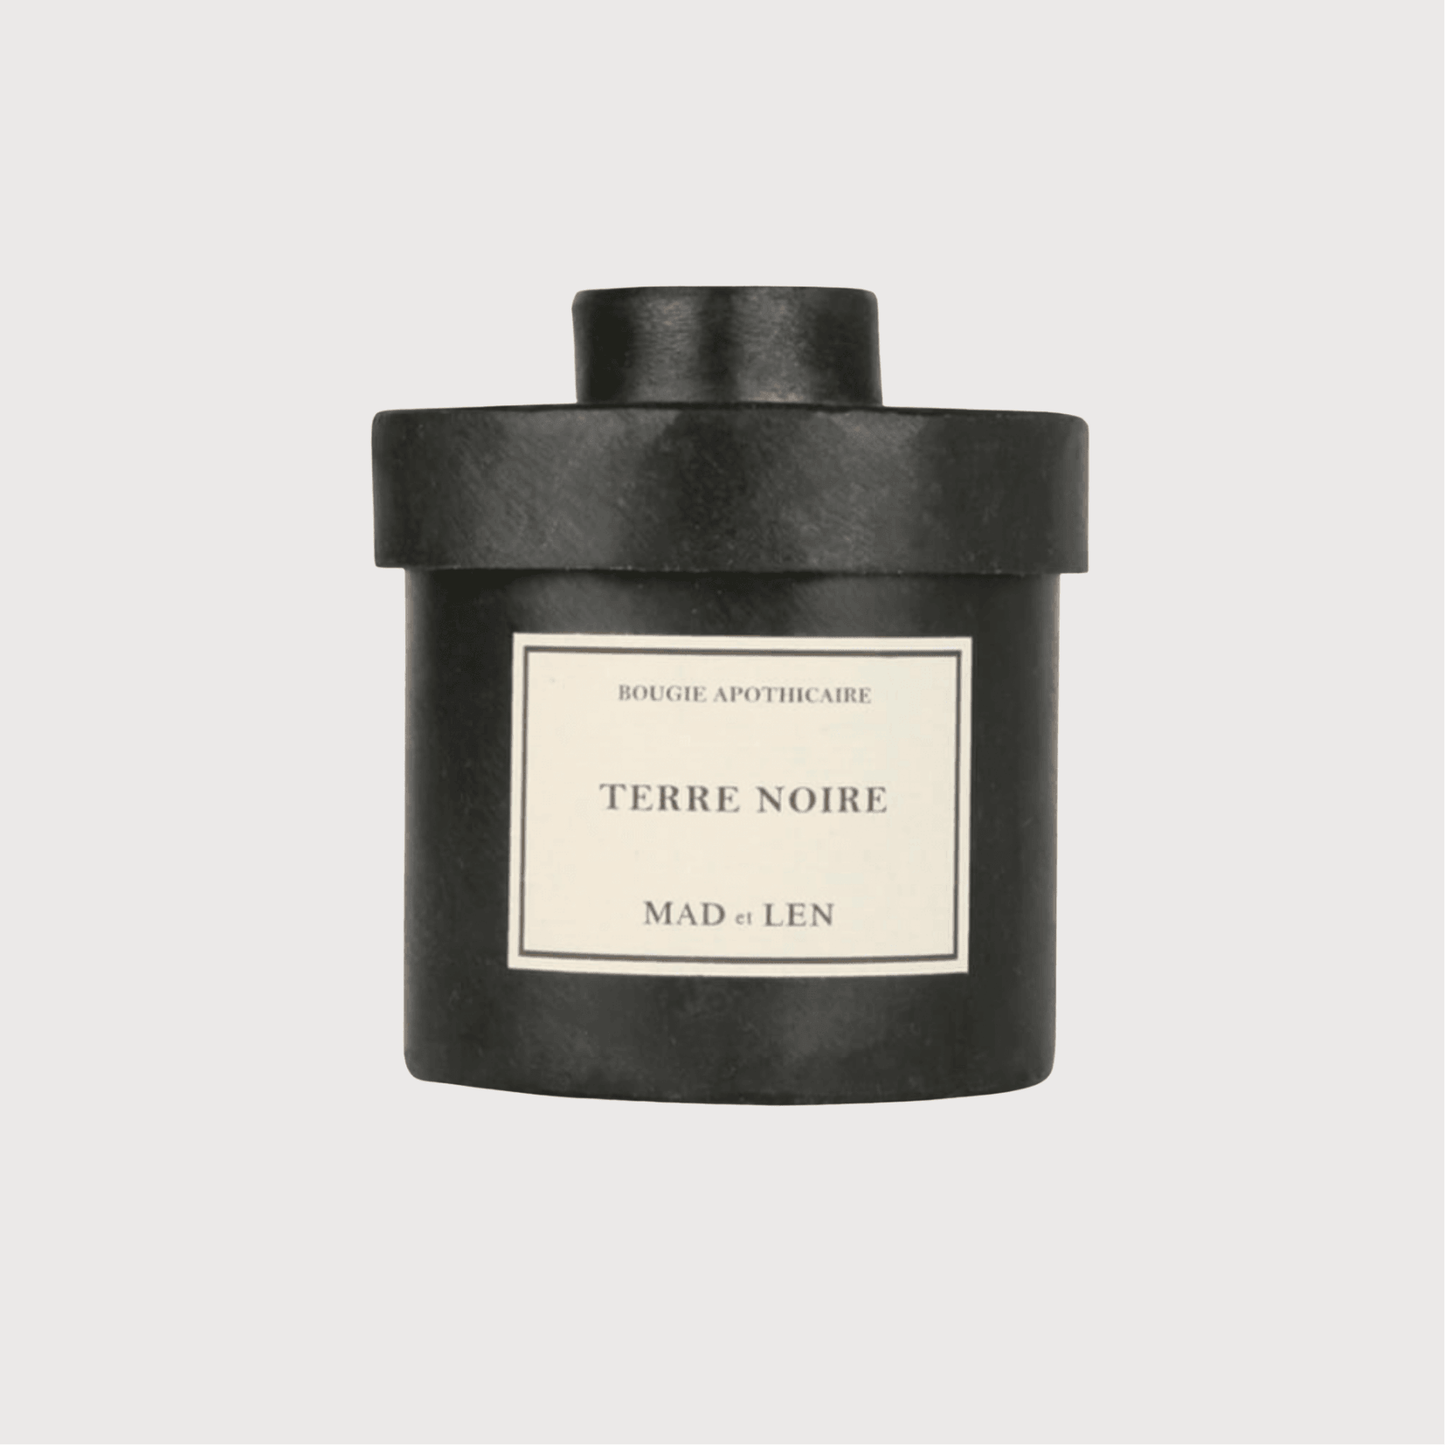 Terre Noire Candle from MAD et LEN - Haven